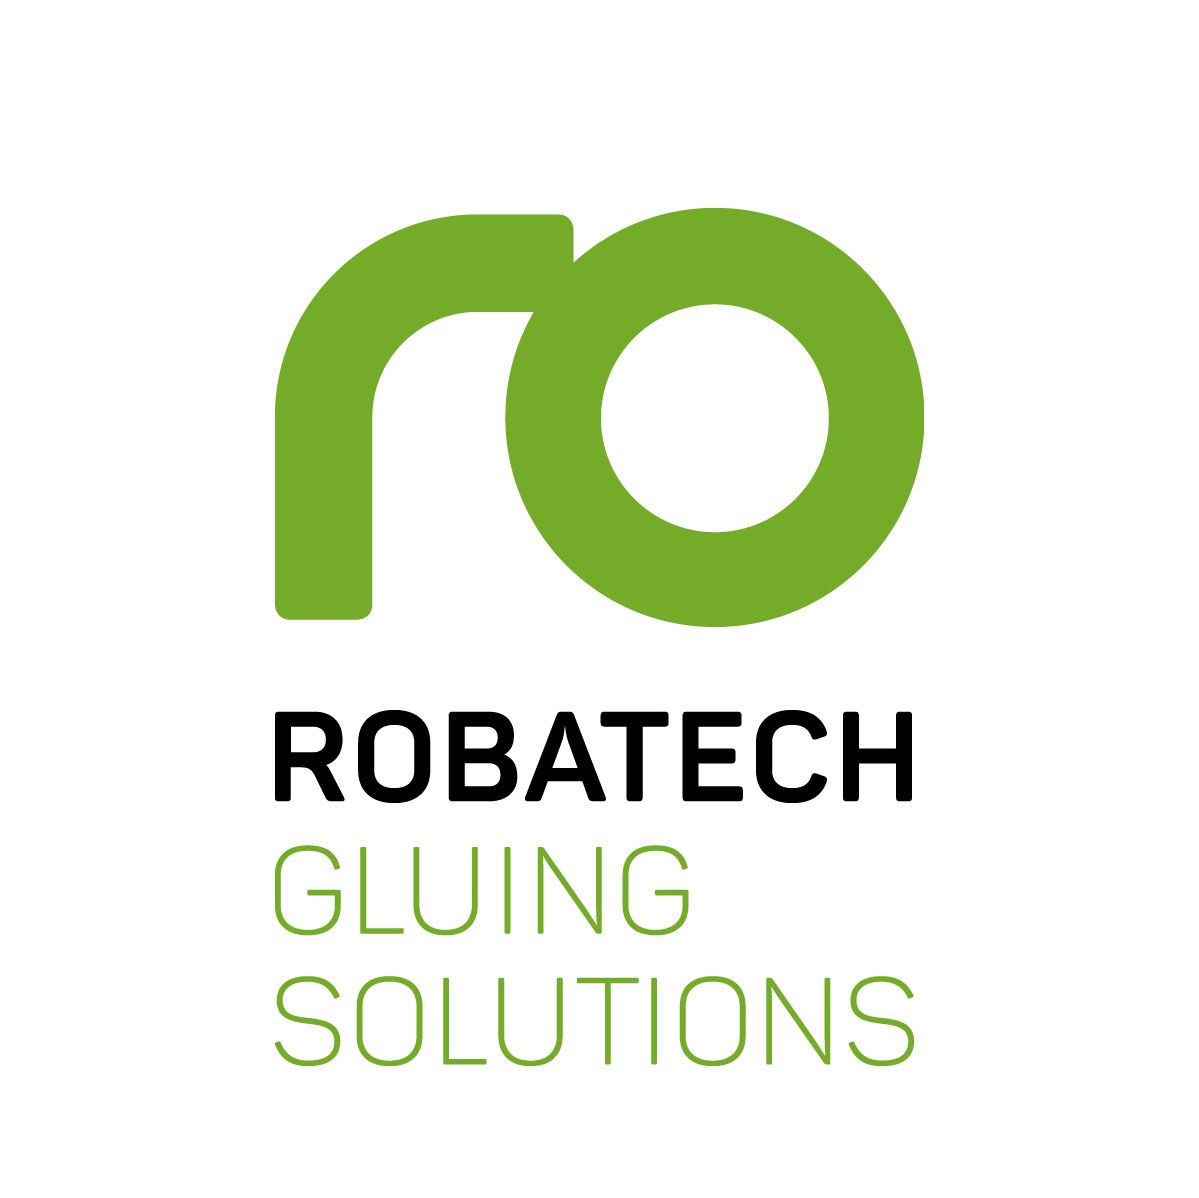 Robatech Gluing Solutions